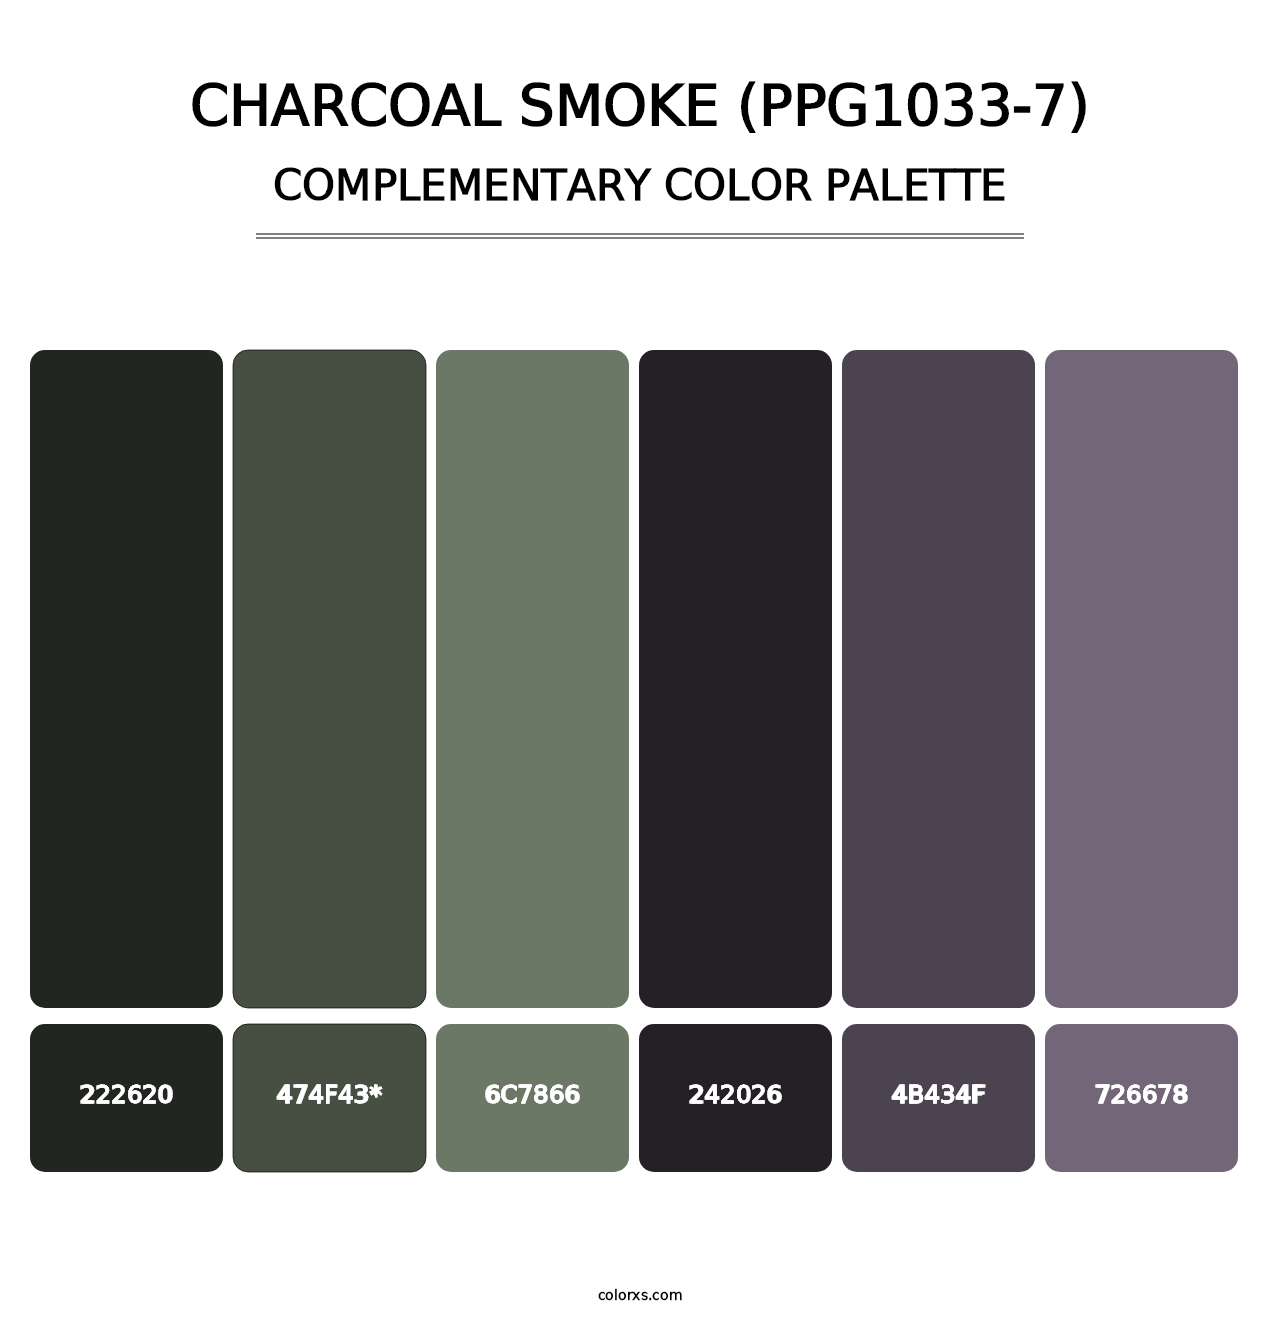 Charcoal Smoke (PPG1033-7) - Complementary Color Palette